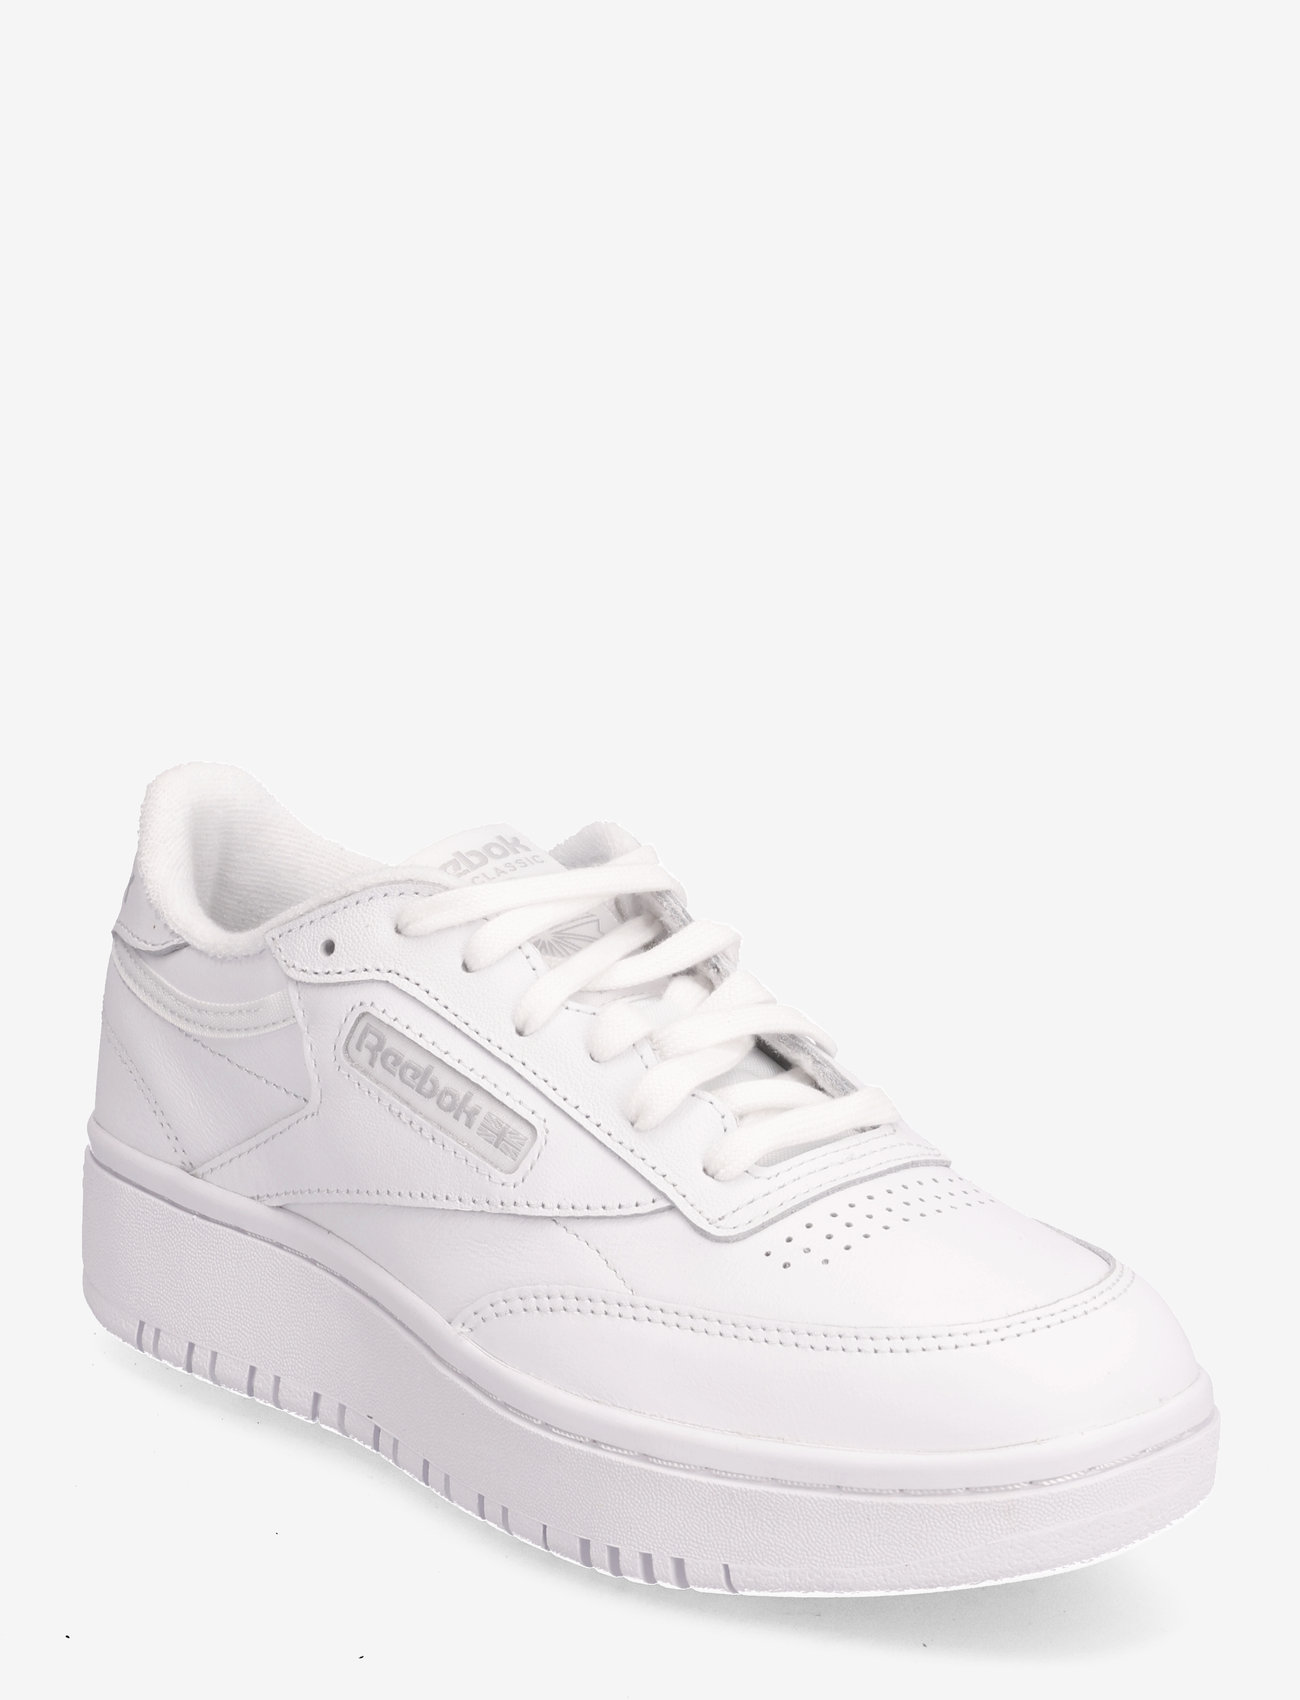 Reebok Classics - CLUB C DOUBLE - lave sneakers - ftwwht/ftwwht/cdgry2 - 0